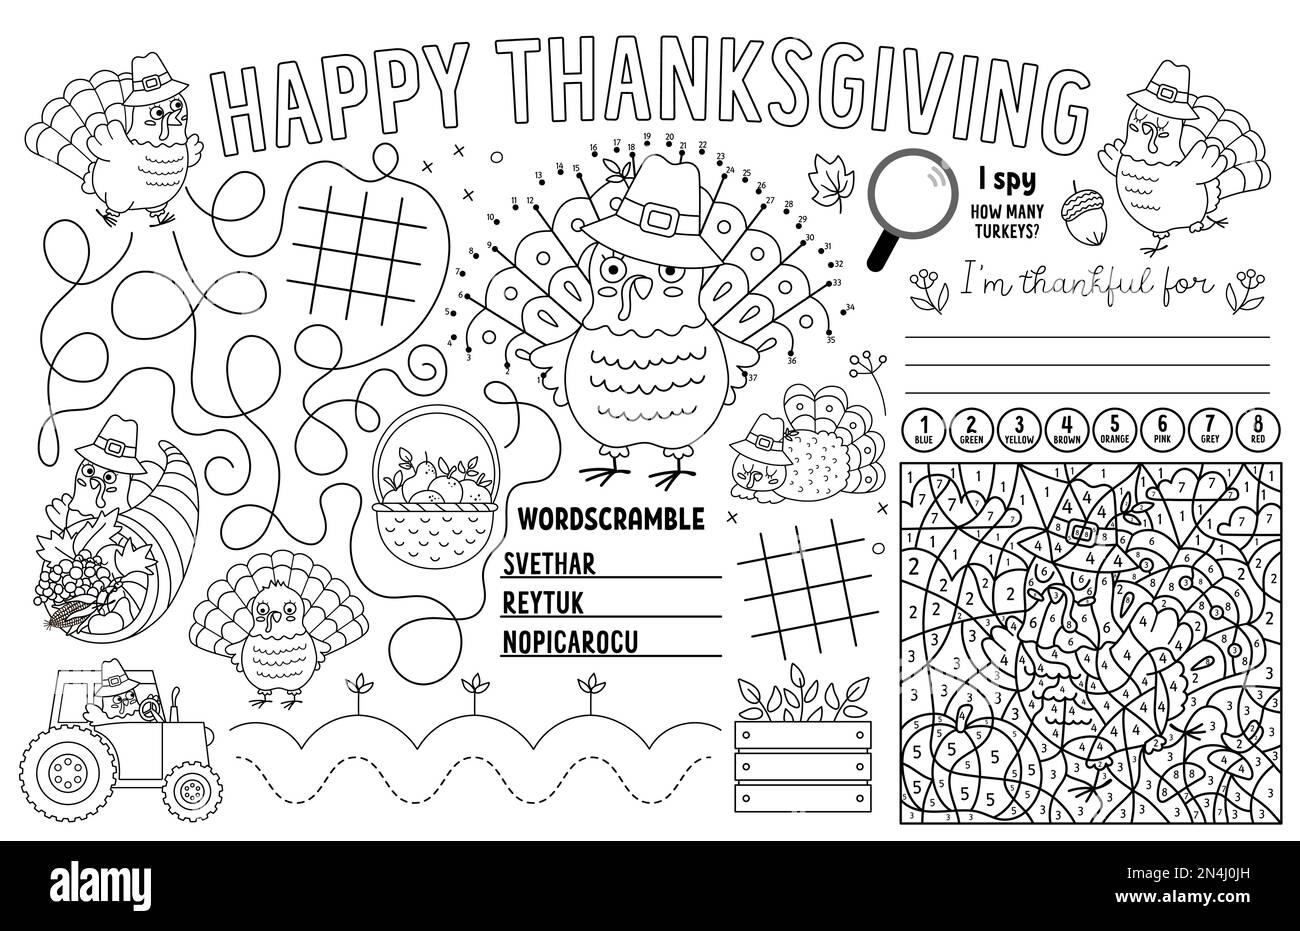 Vector thanksgiving placemat for kids fall holiday printable activity mat with maze tic tac toe charts connect the dots find difference black and stock vector image art